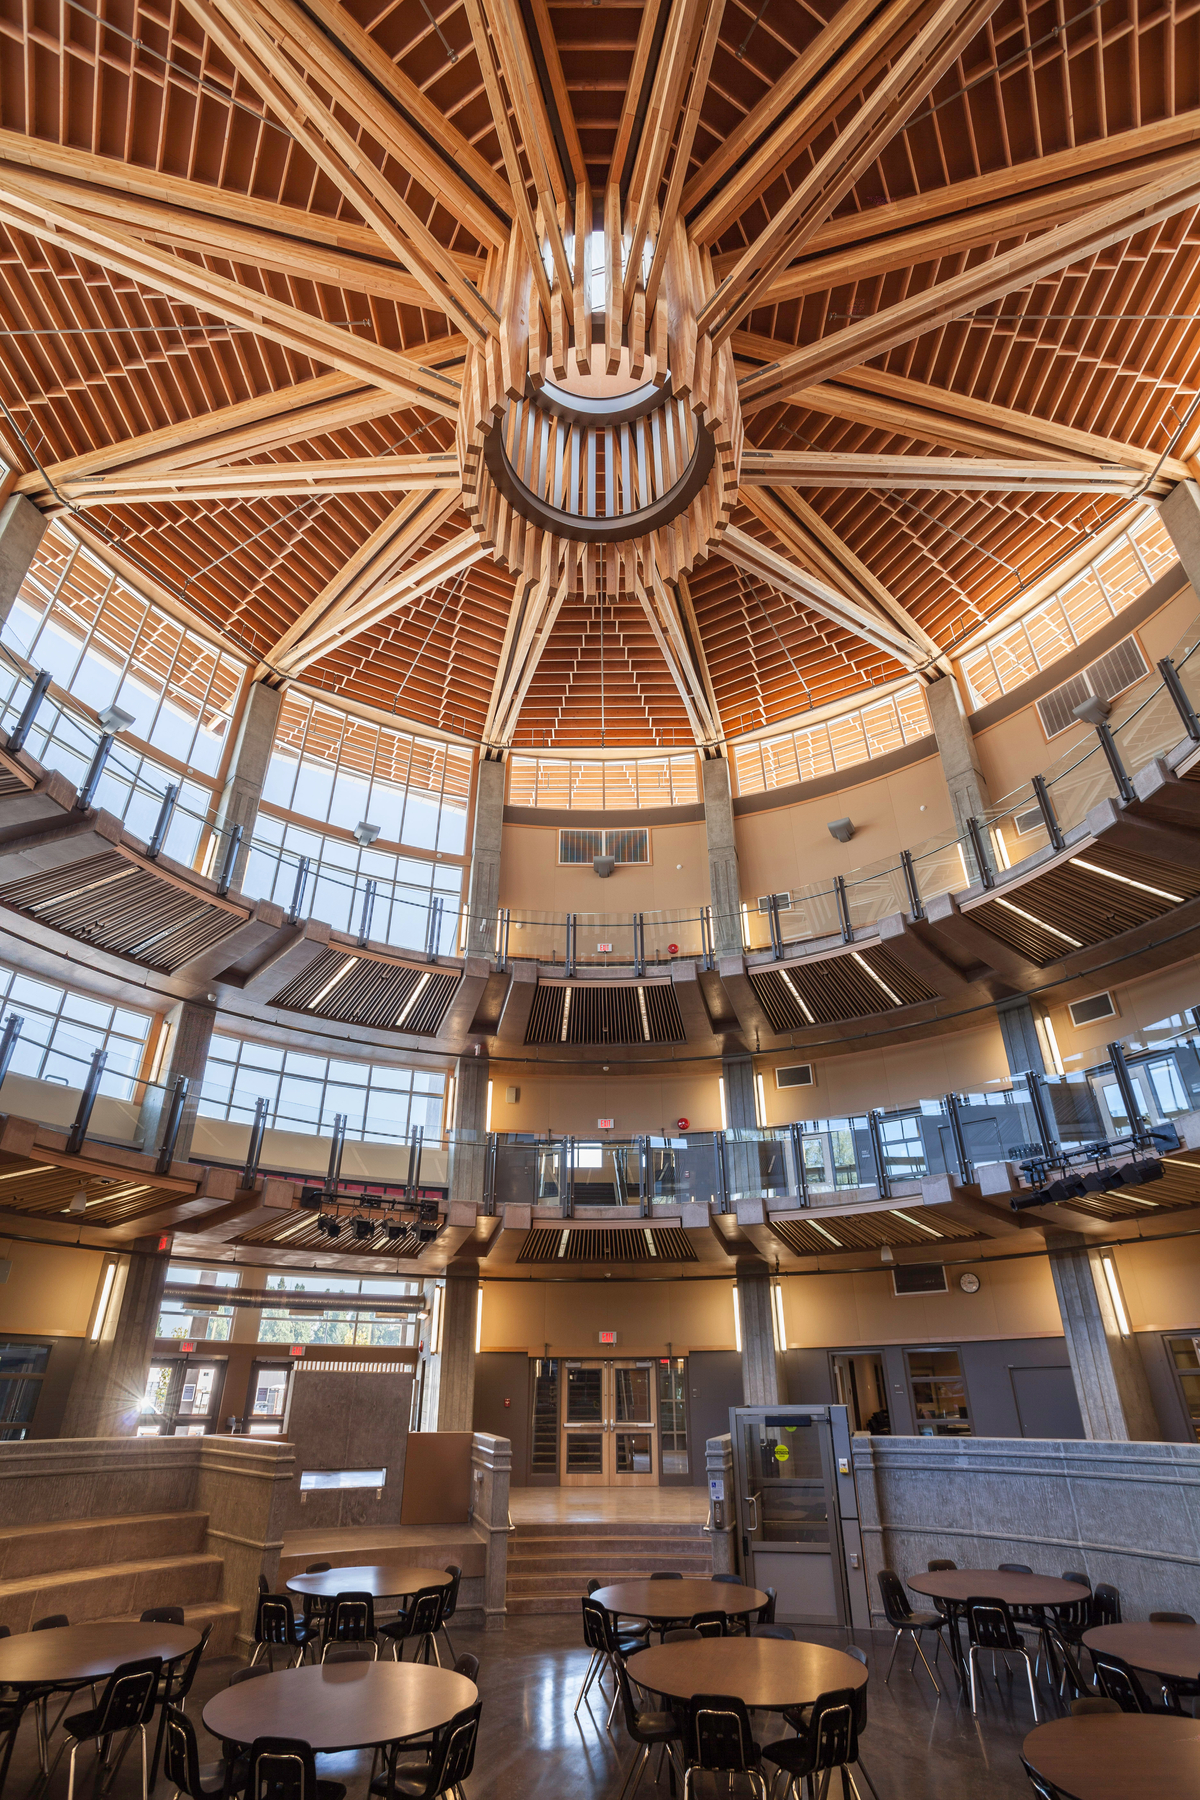 Glue-laminated timber (Glulam), paneling, plywood, and solid-sawn heavy timbers were combined to create the concentric circles and circular balcony shown in this interior image of the Abbotsford Senior Secondary School ceiling